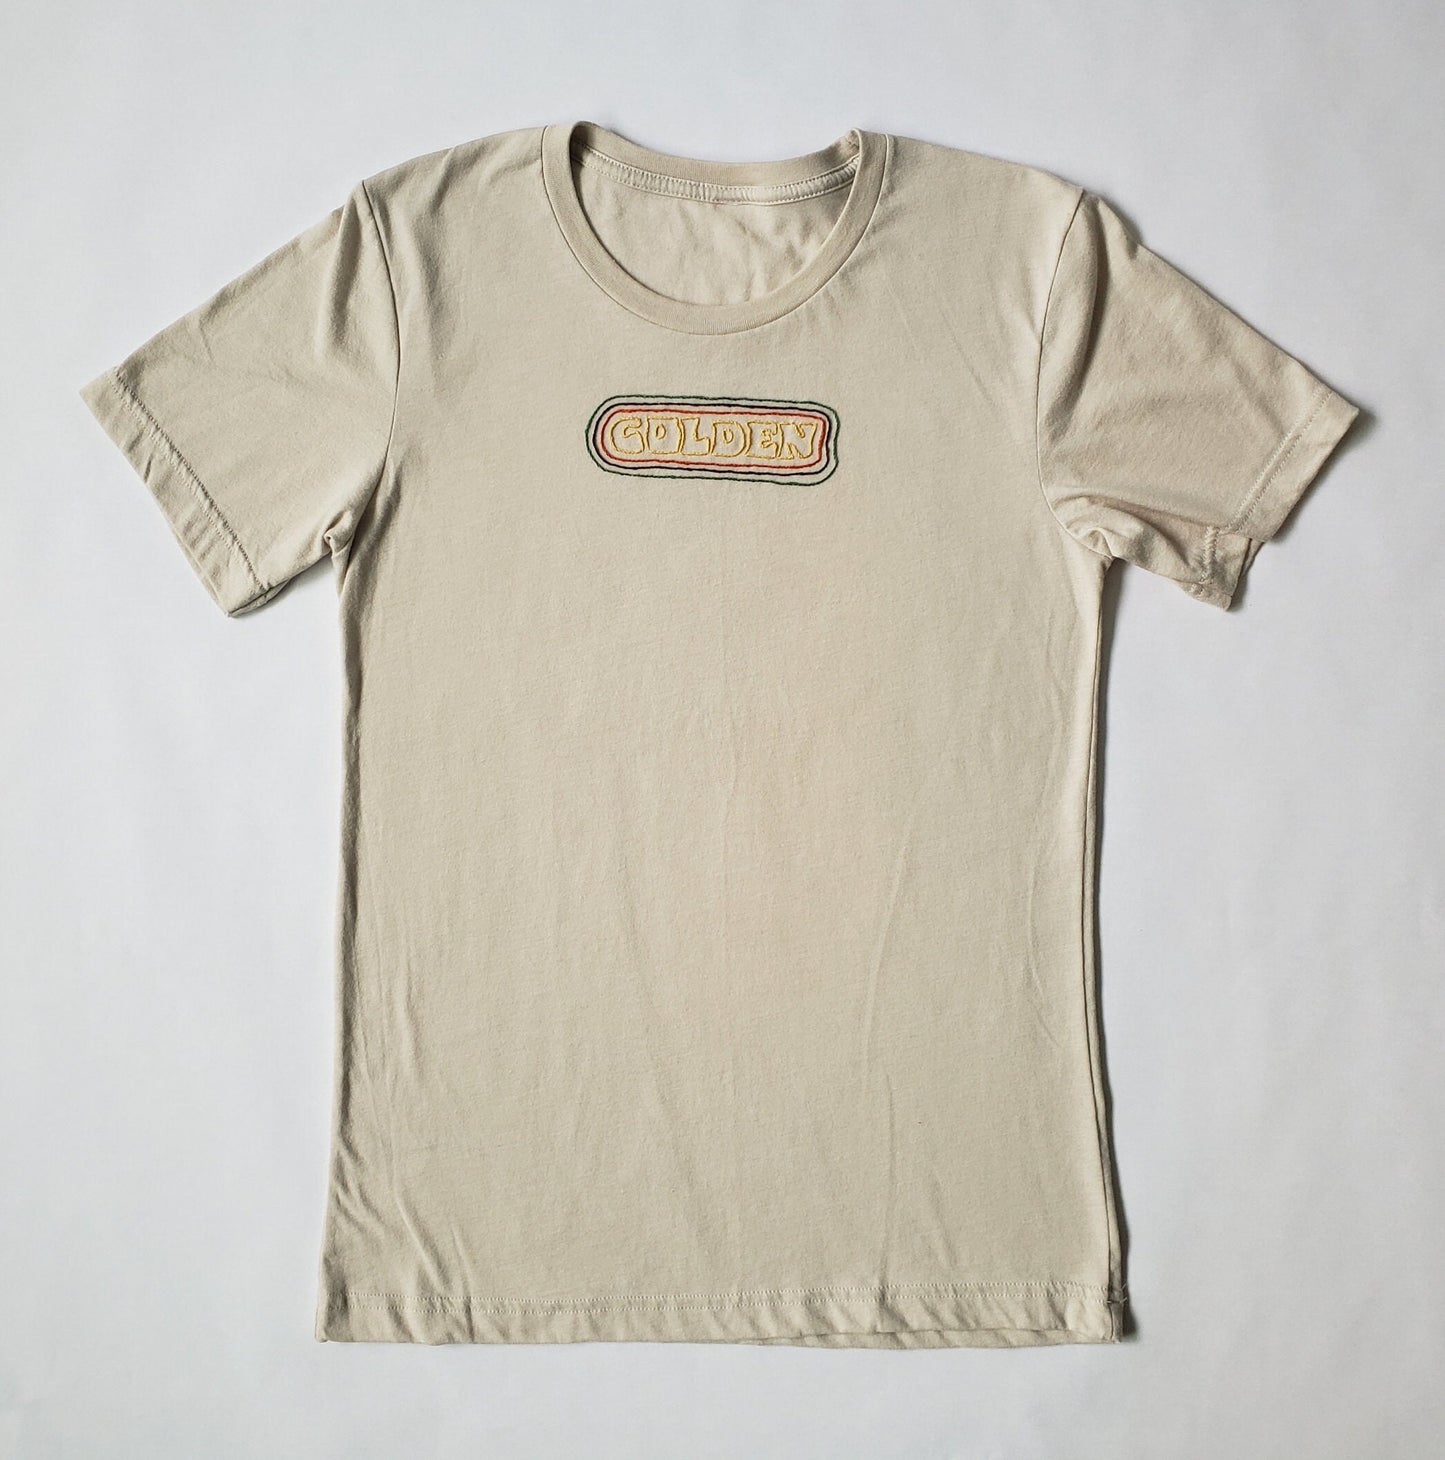 A sandstone crewneck tee lays flat on a white background. "GOLDEN" is hand sewn in a burnished gold thread. The text is encircled by an orange line, then brown, then green. About 4 mm is between each concentric border.